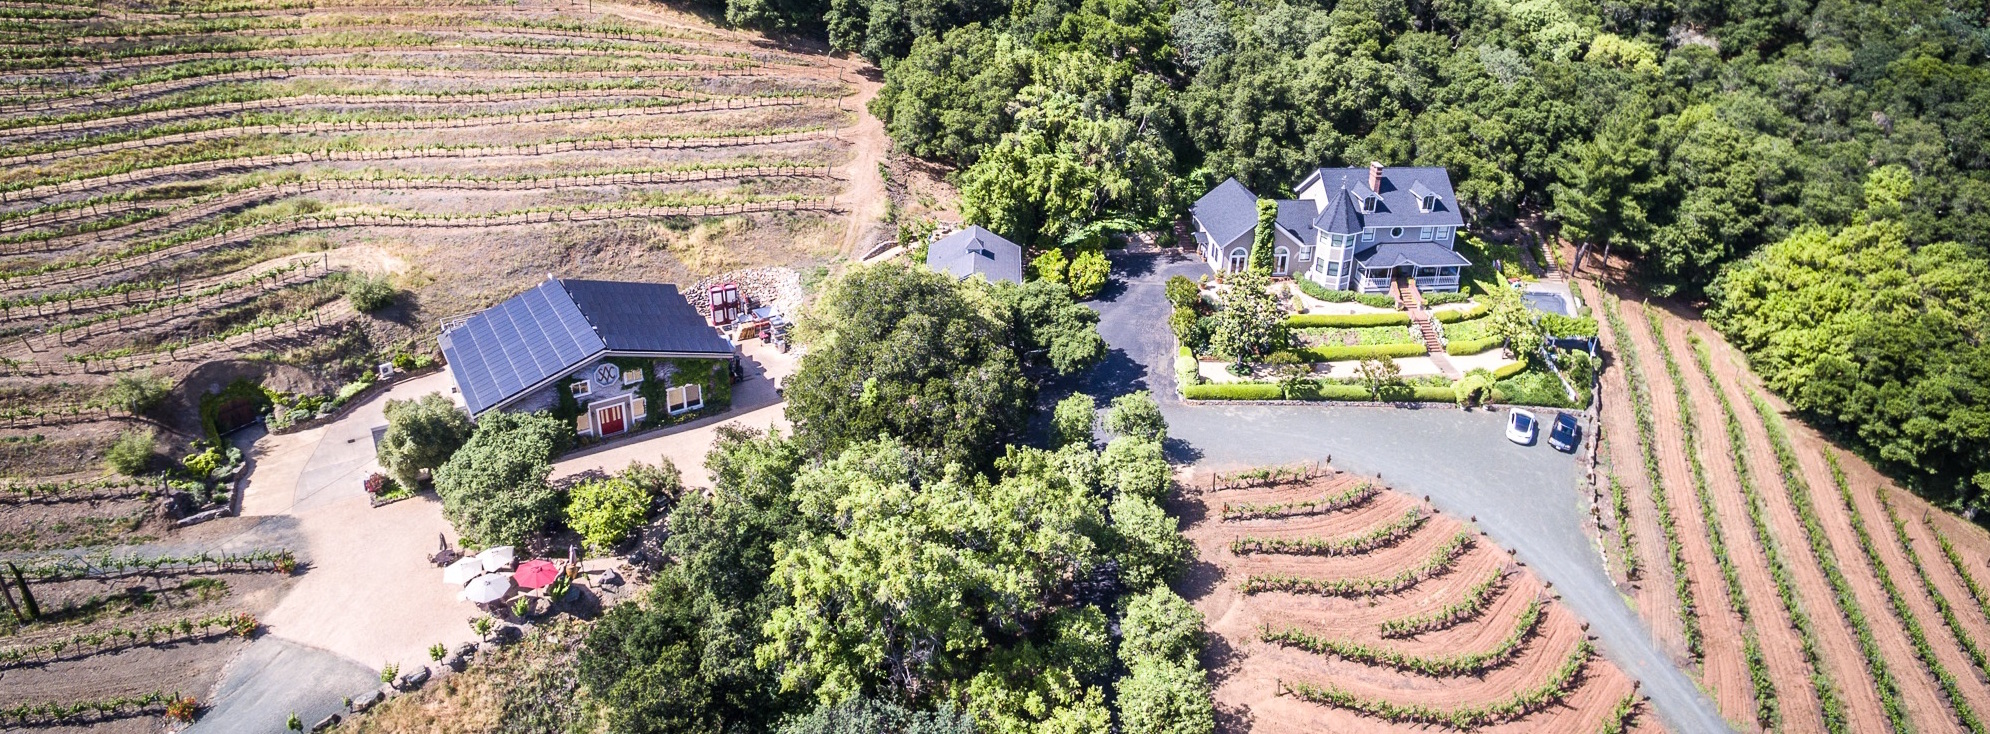 Amizetta Estate aerial view of house and tasting room 